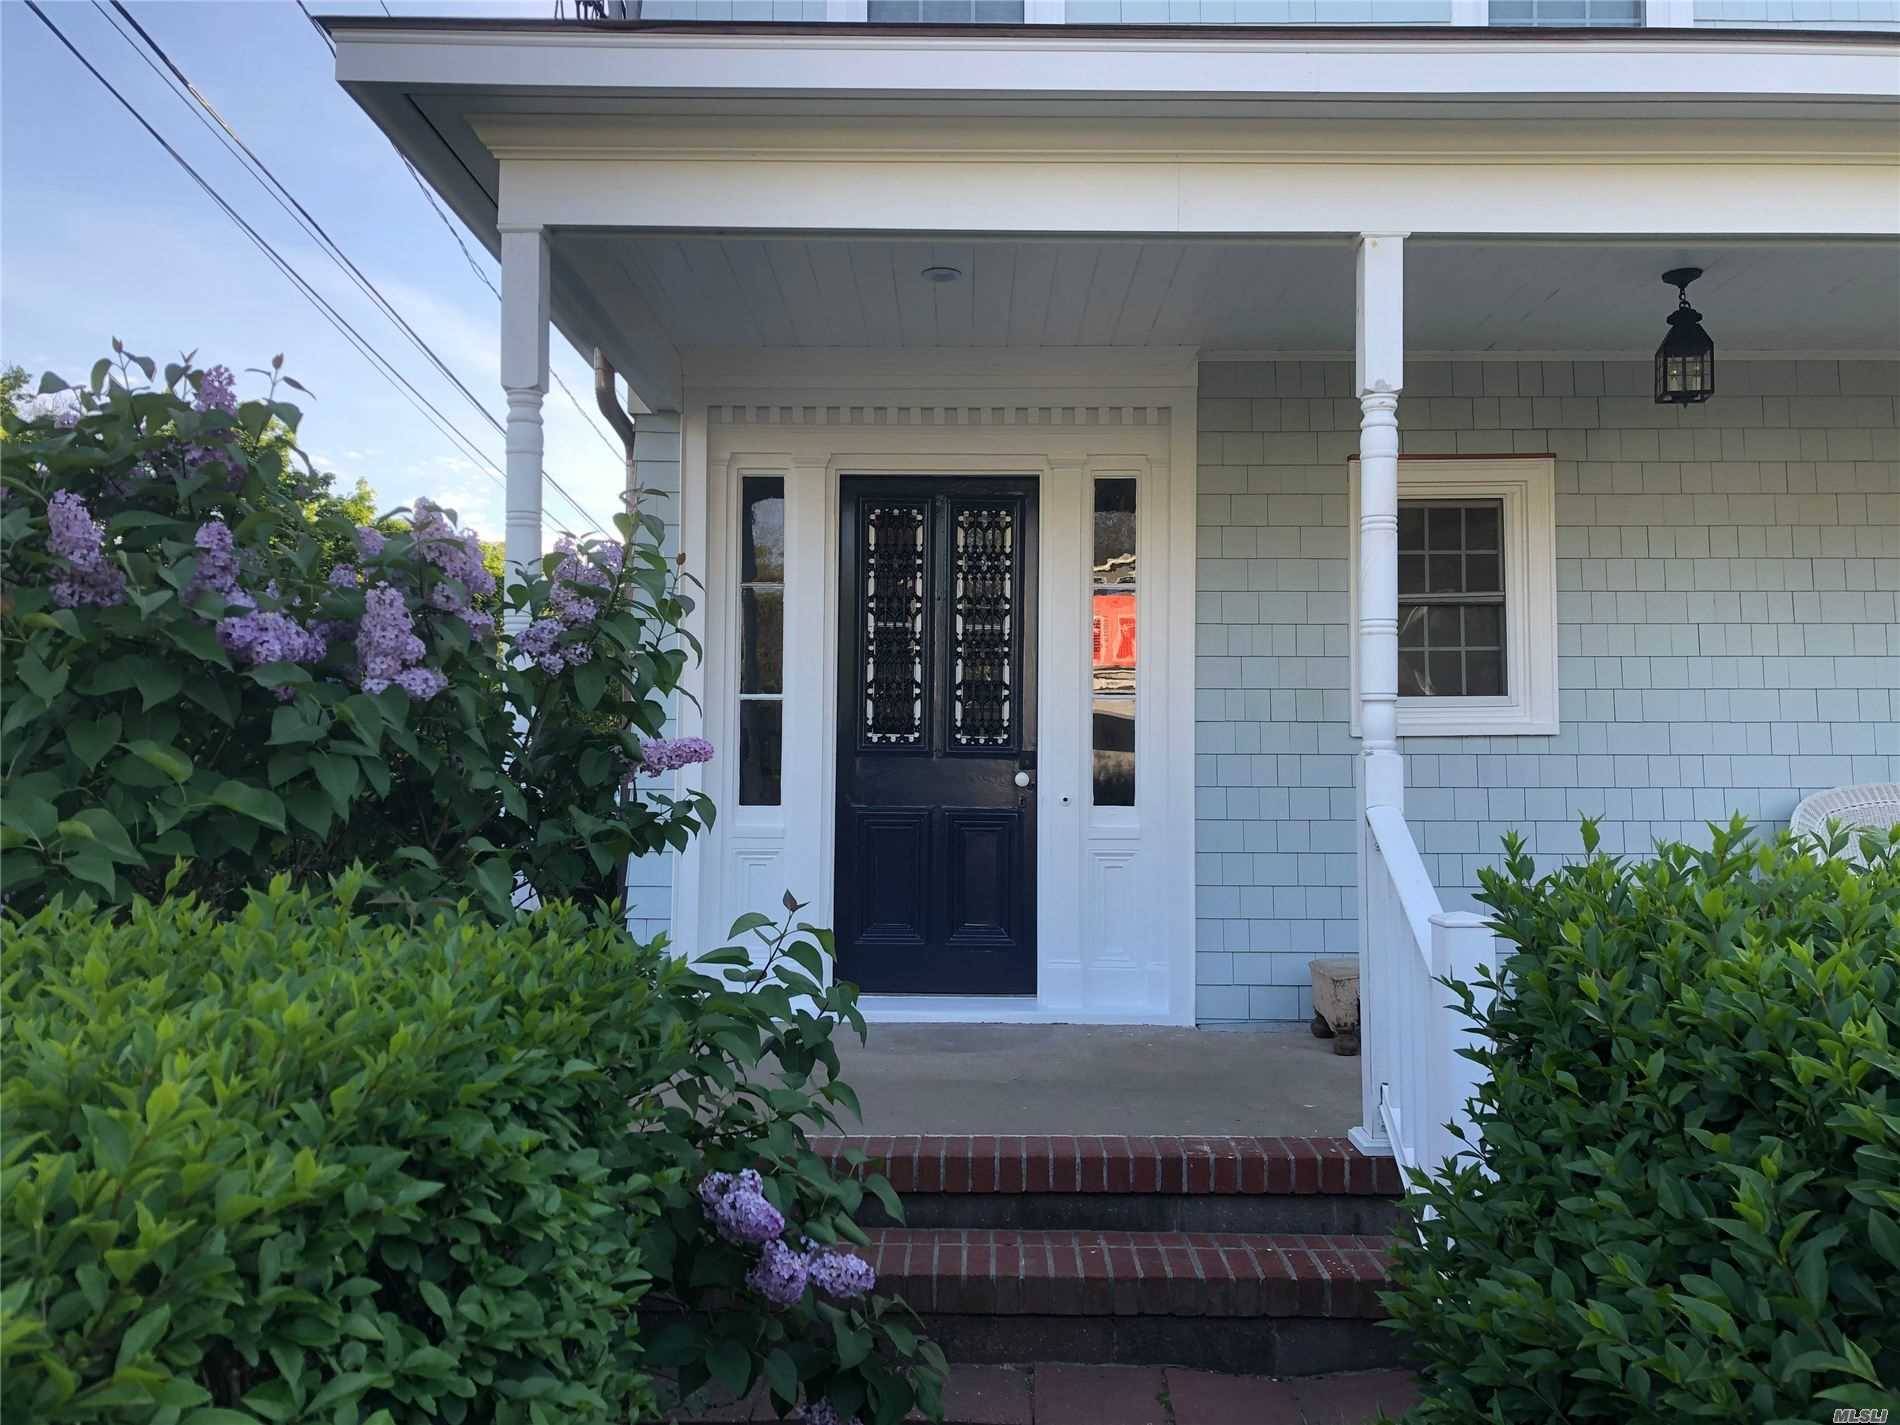 Southold, North Fork North Fork Resident's Inn beautifully restored authentic farmhouse, second floor apartment with comfortable upscale appointments including rocking chair front porch, entry hall, large living room with GREAT ...